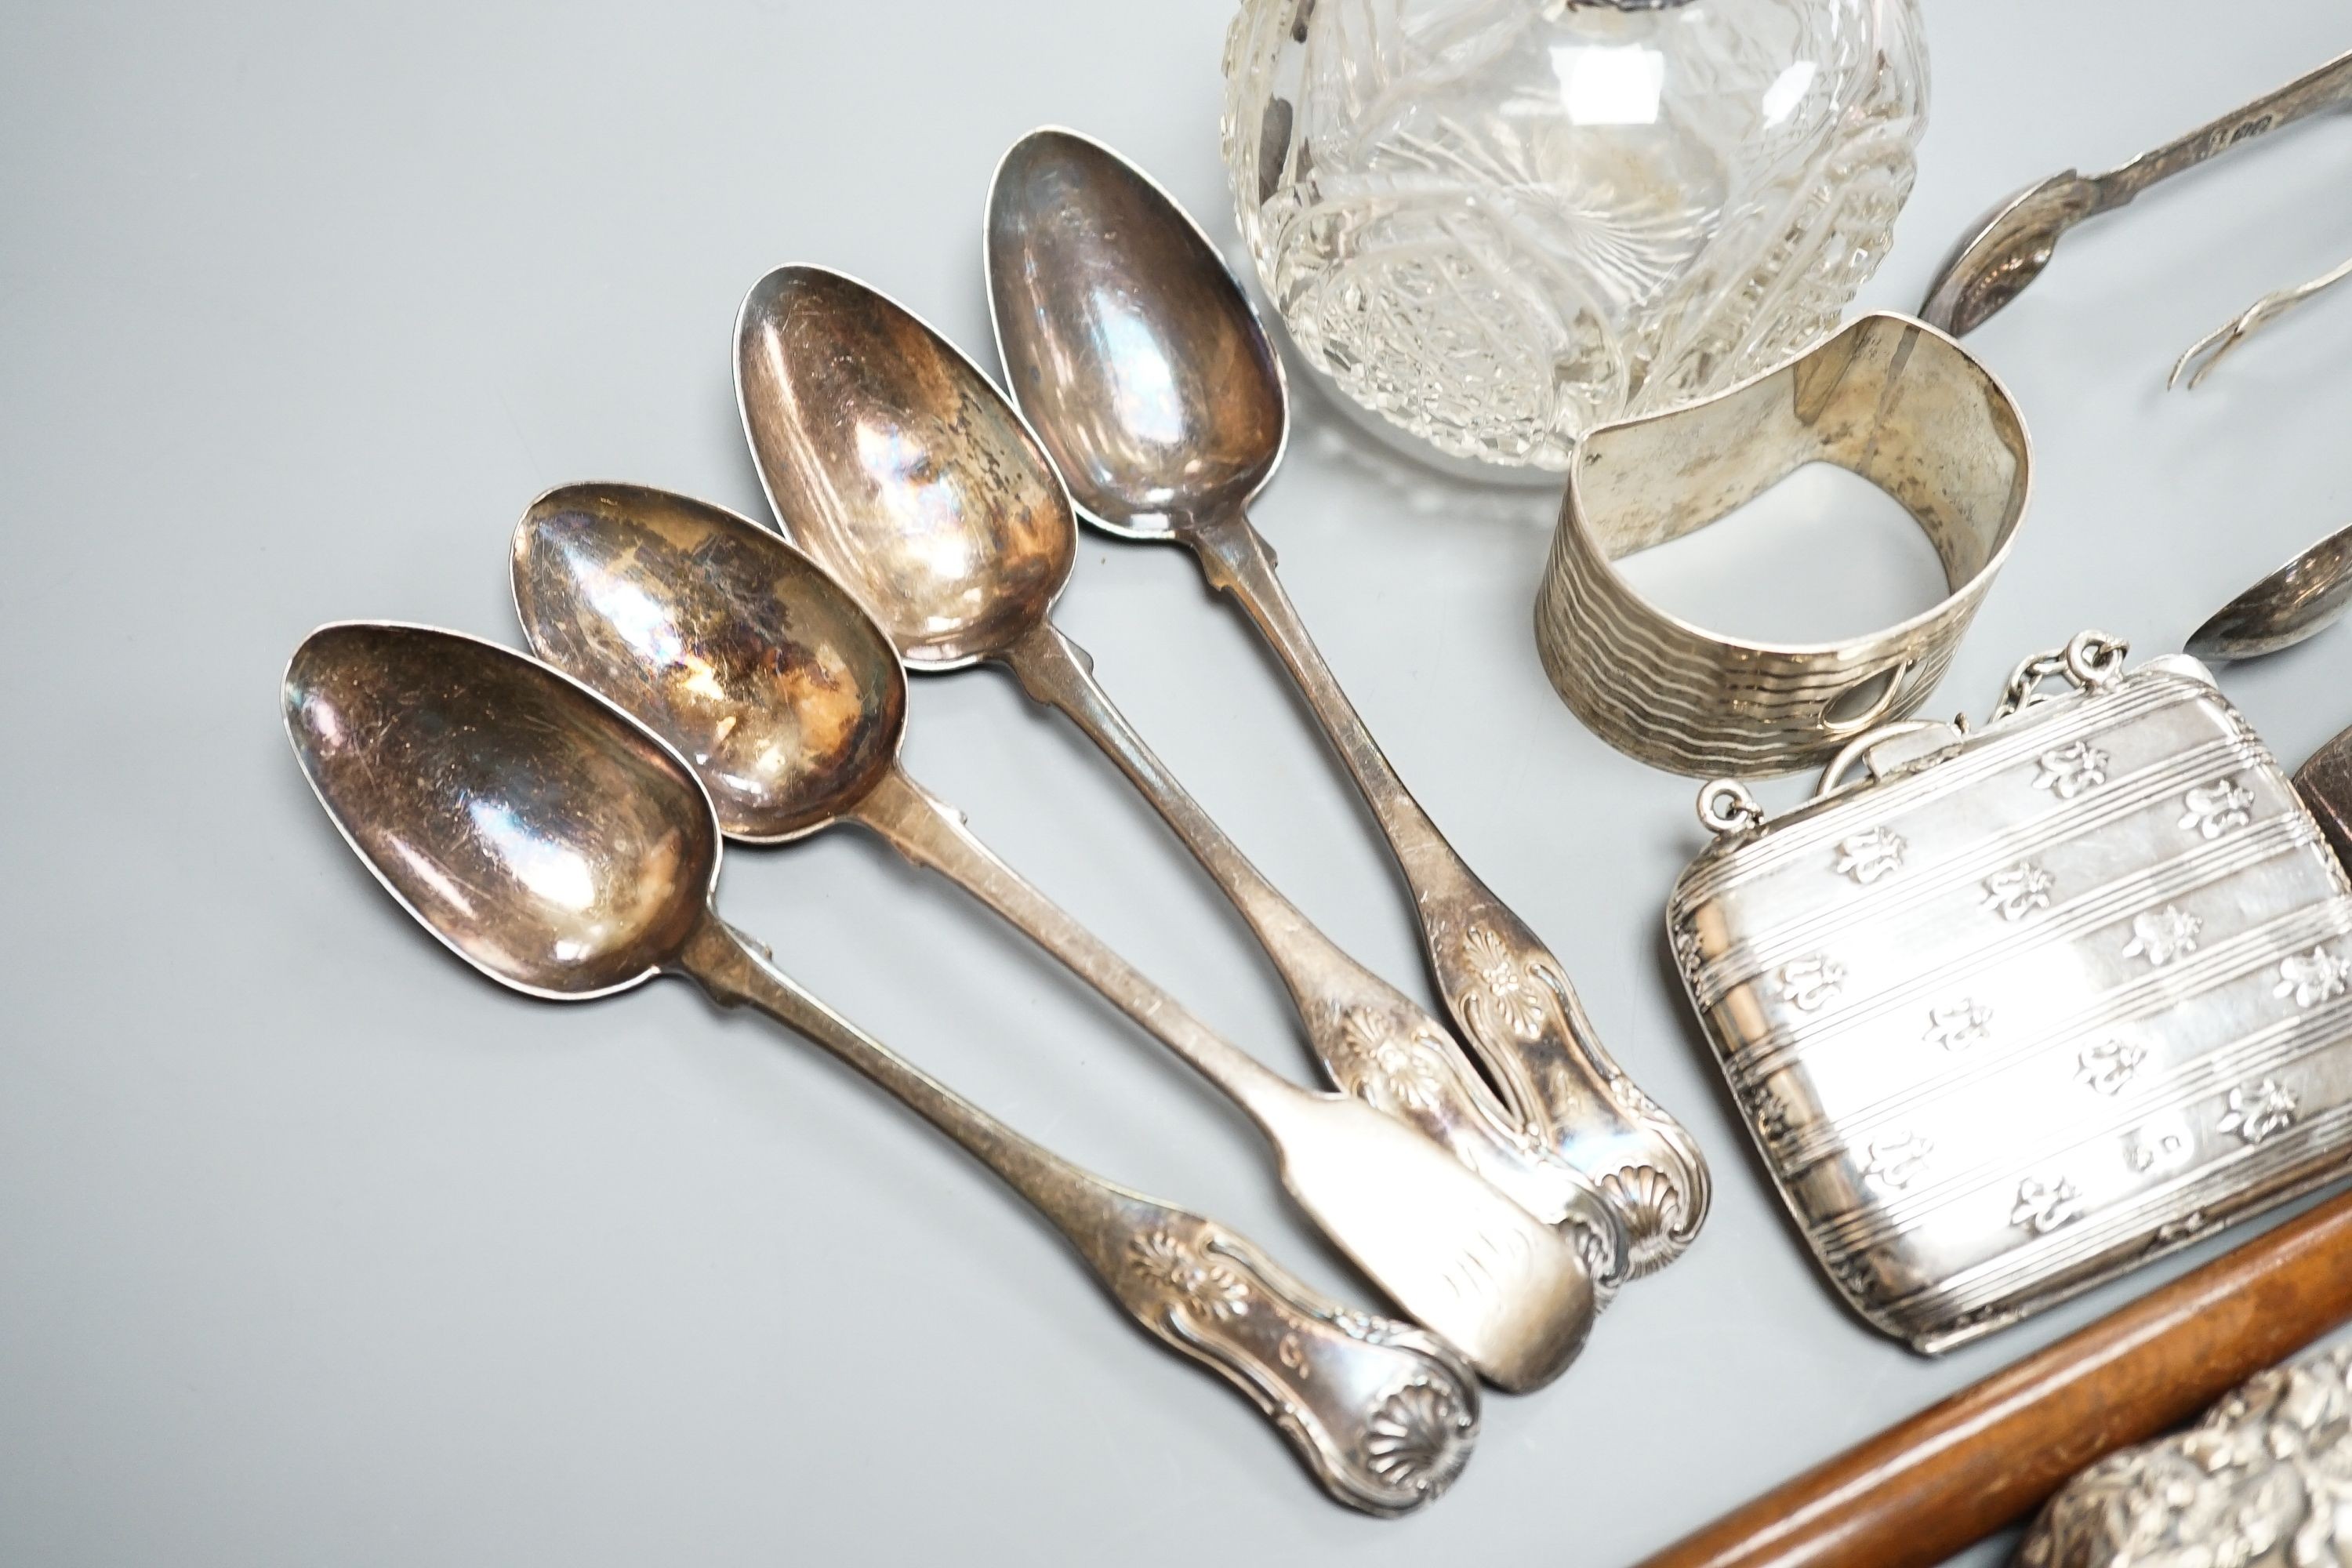 An 18th century silver toddy ladle, with wooden handle(a.f.) and a group of small silver including flatware, napkin ring, scent bottle, repousse box and cover and purse.